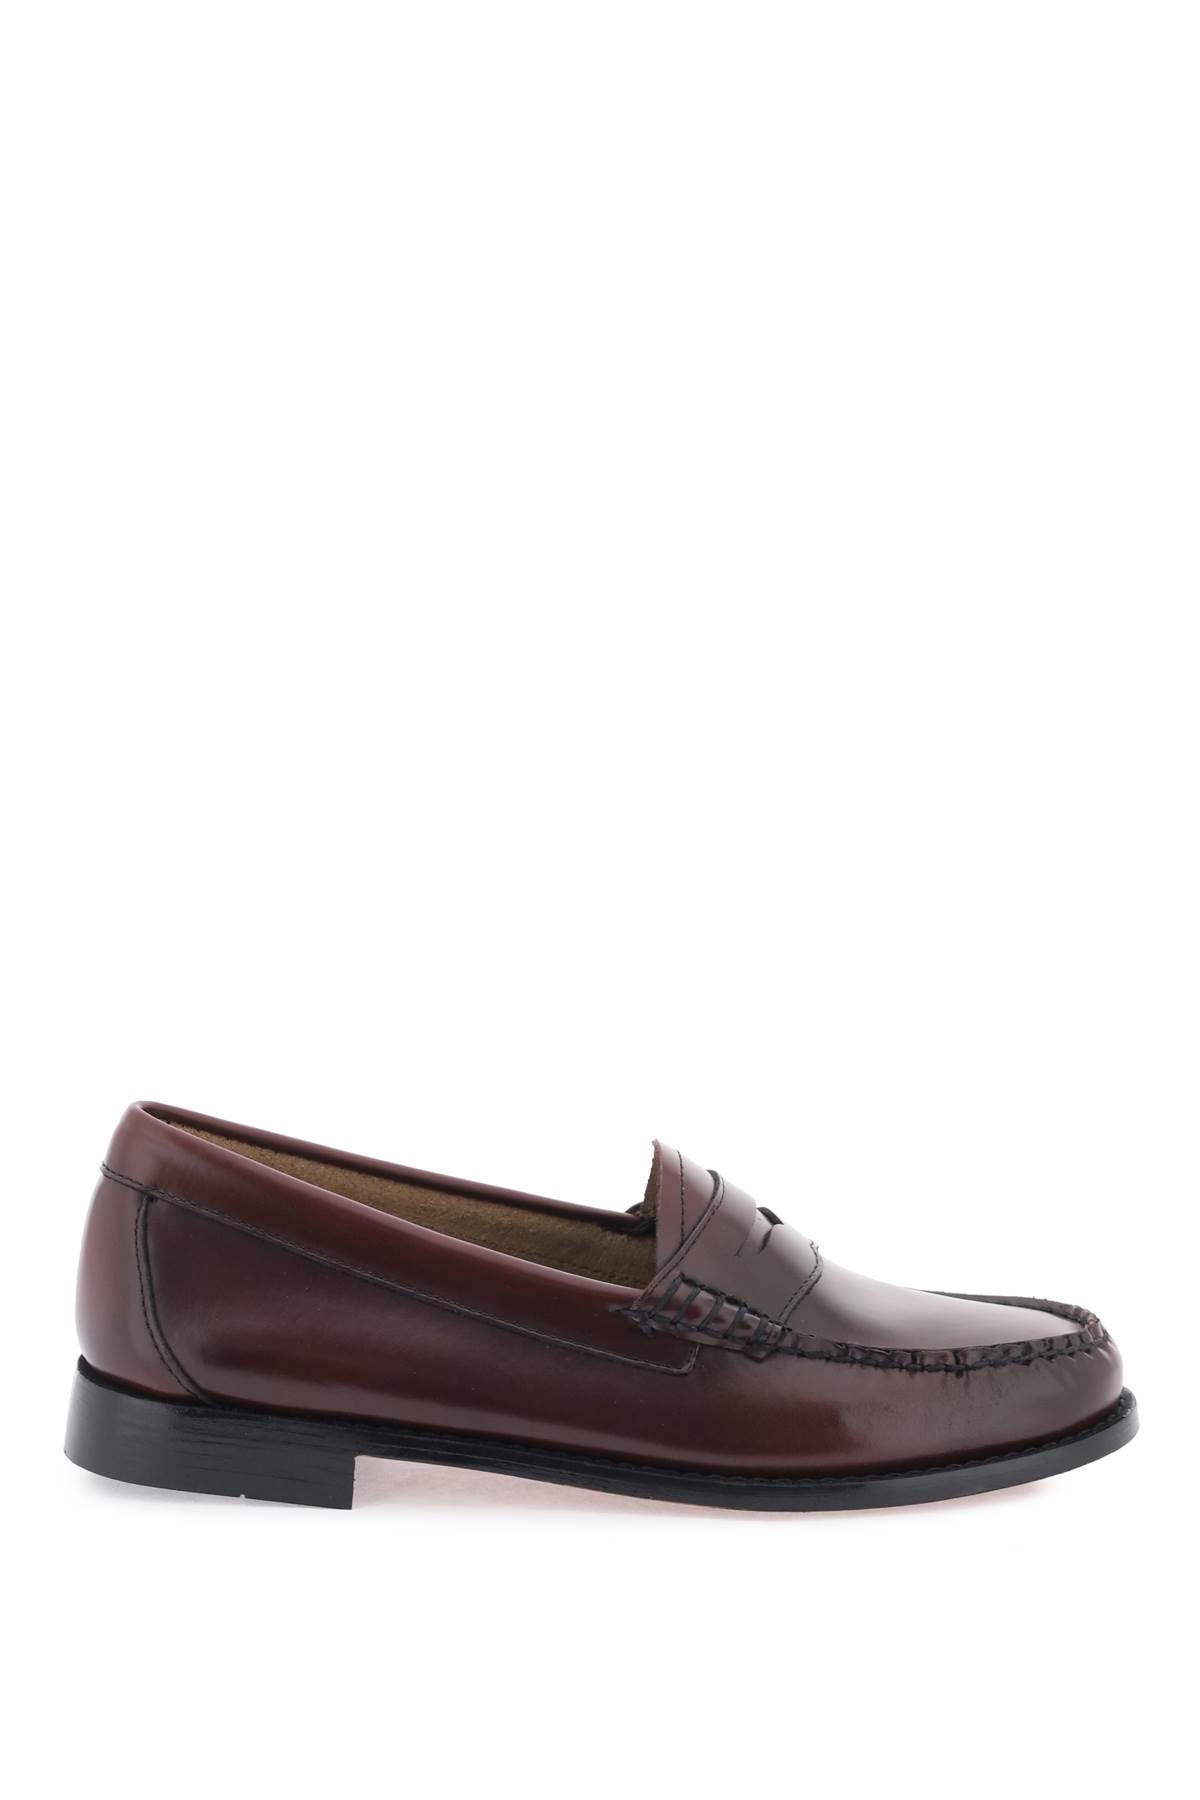 G.H.Bass & Co. weejuns Penny Loafers